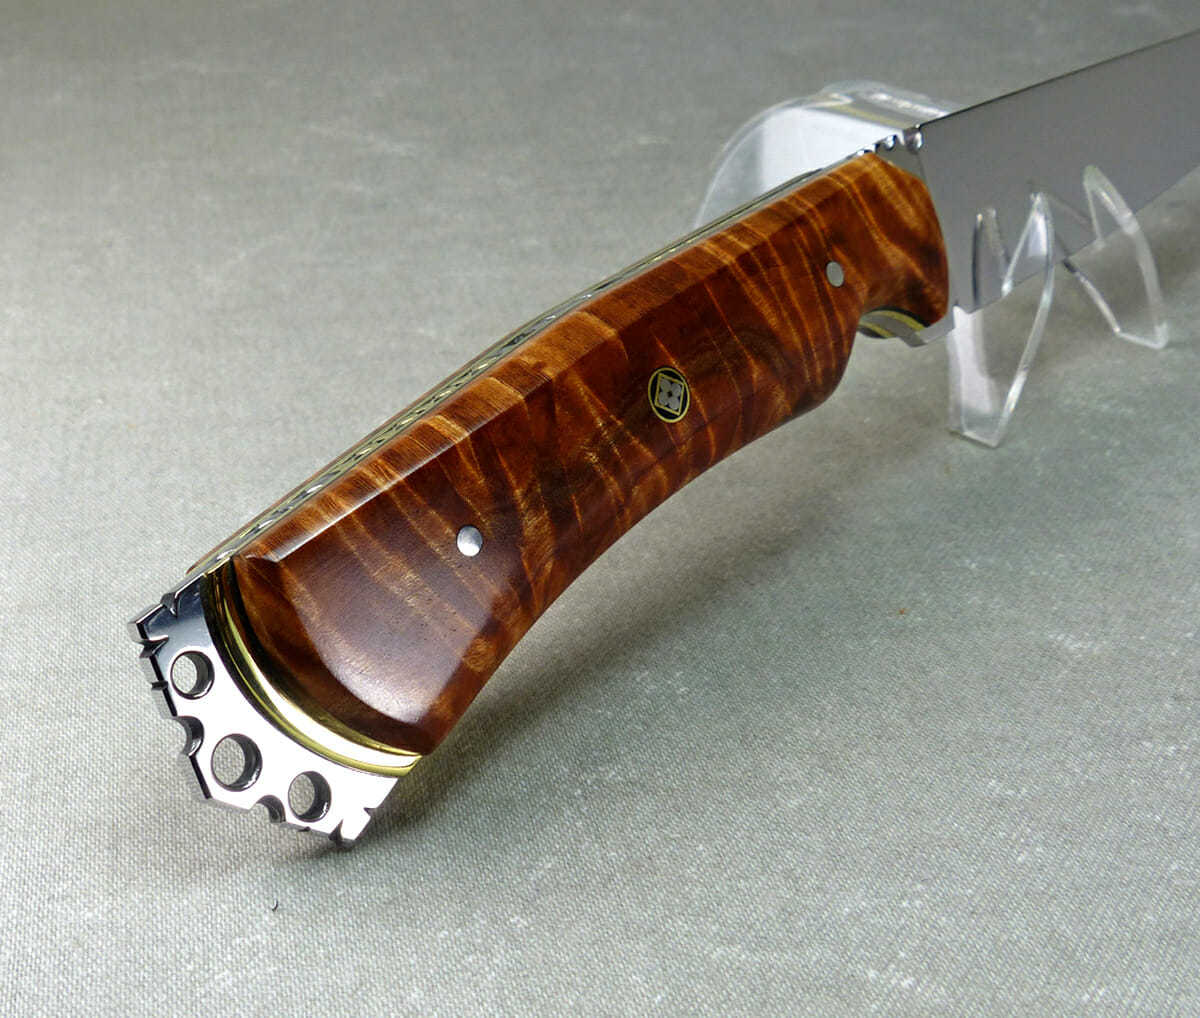 Sculptured metal crown on end of brown flame maple knife handle showing exposed brass plate